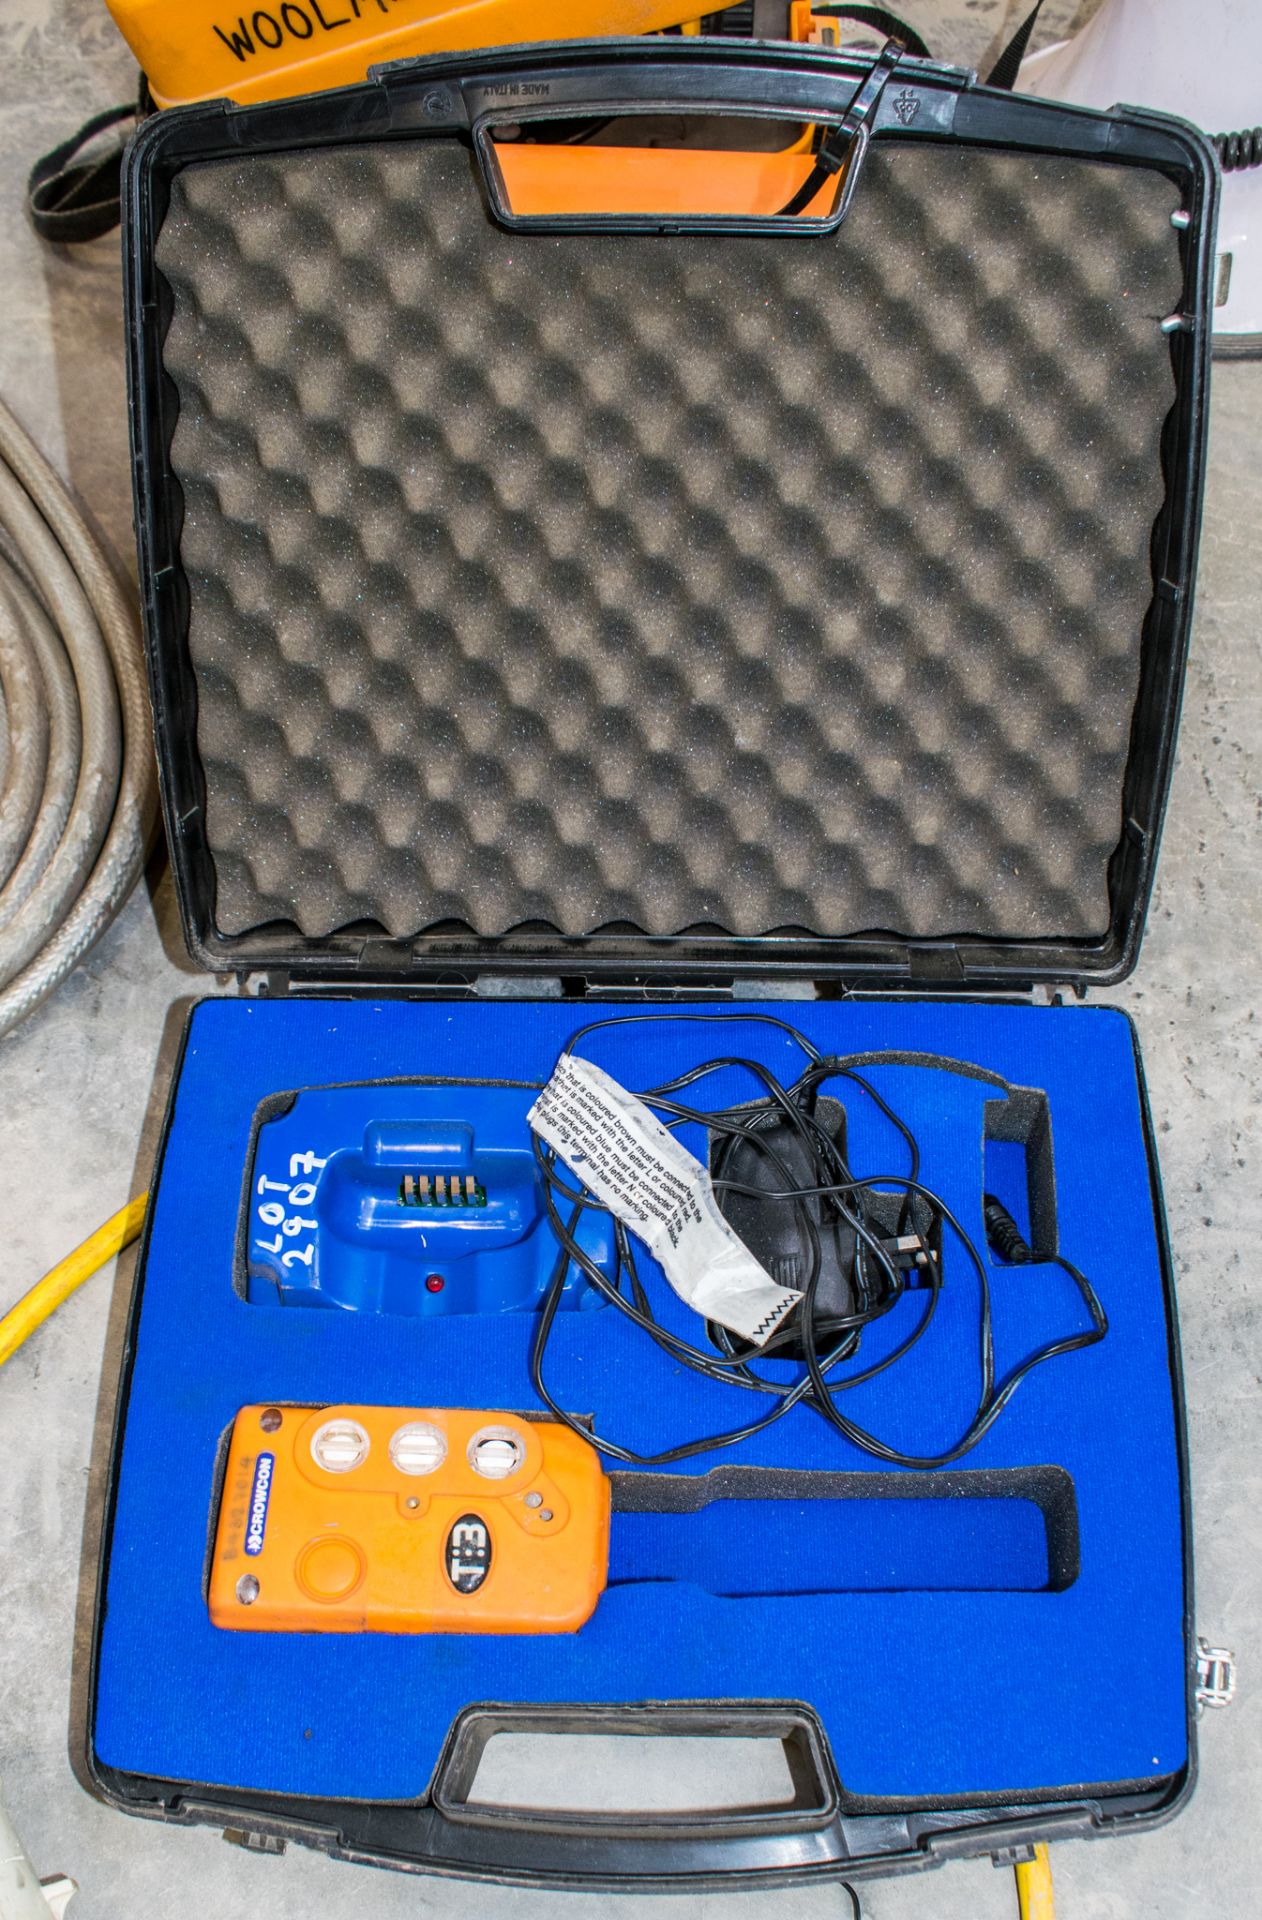 Crowcon T3 gas detector c/w carry case